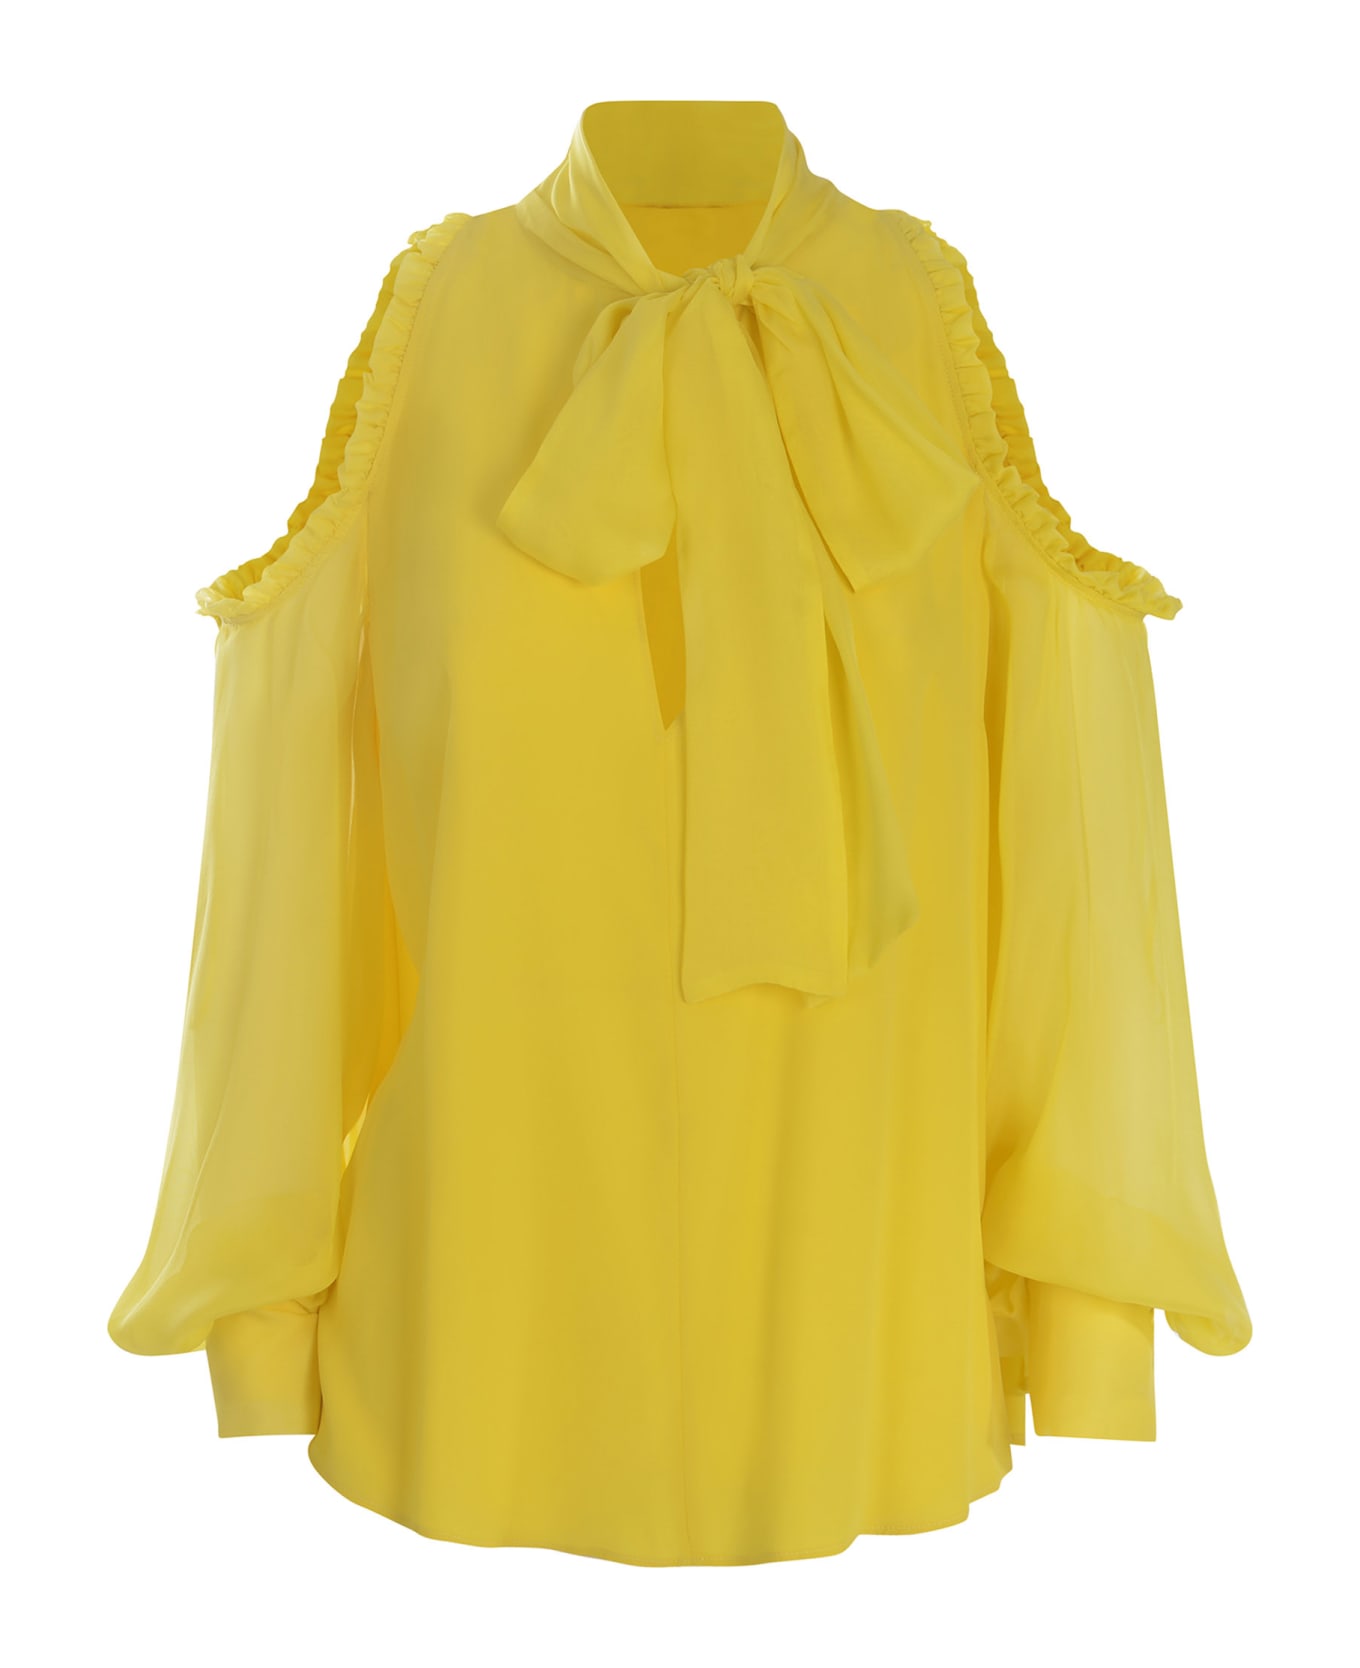 Pinko Blouse With Bare Shoulders - Giallo ブラウス